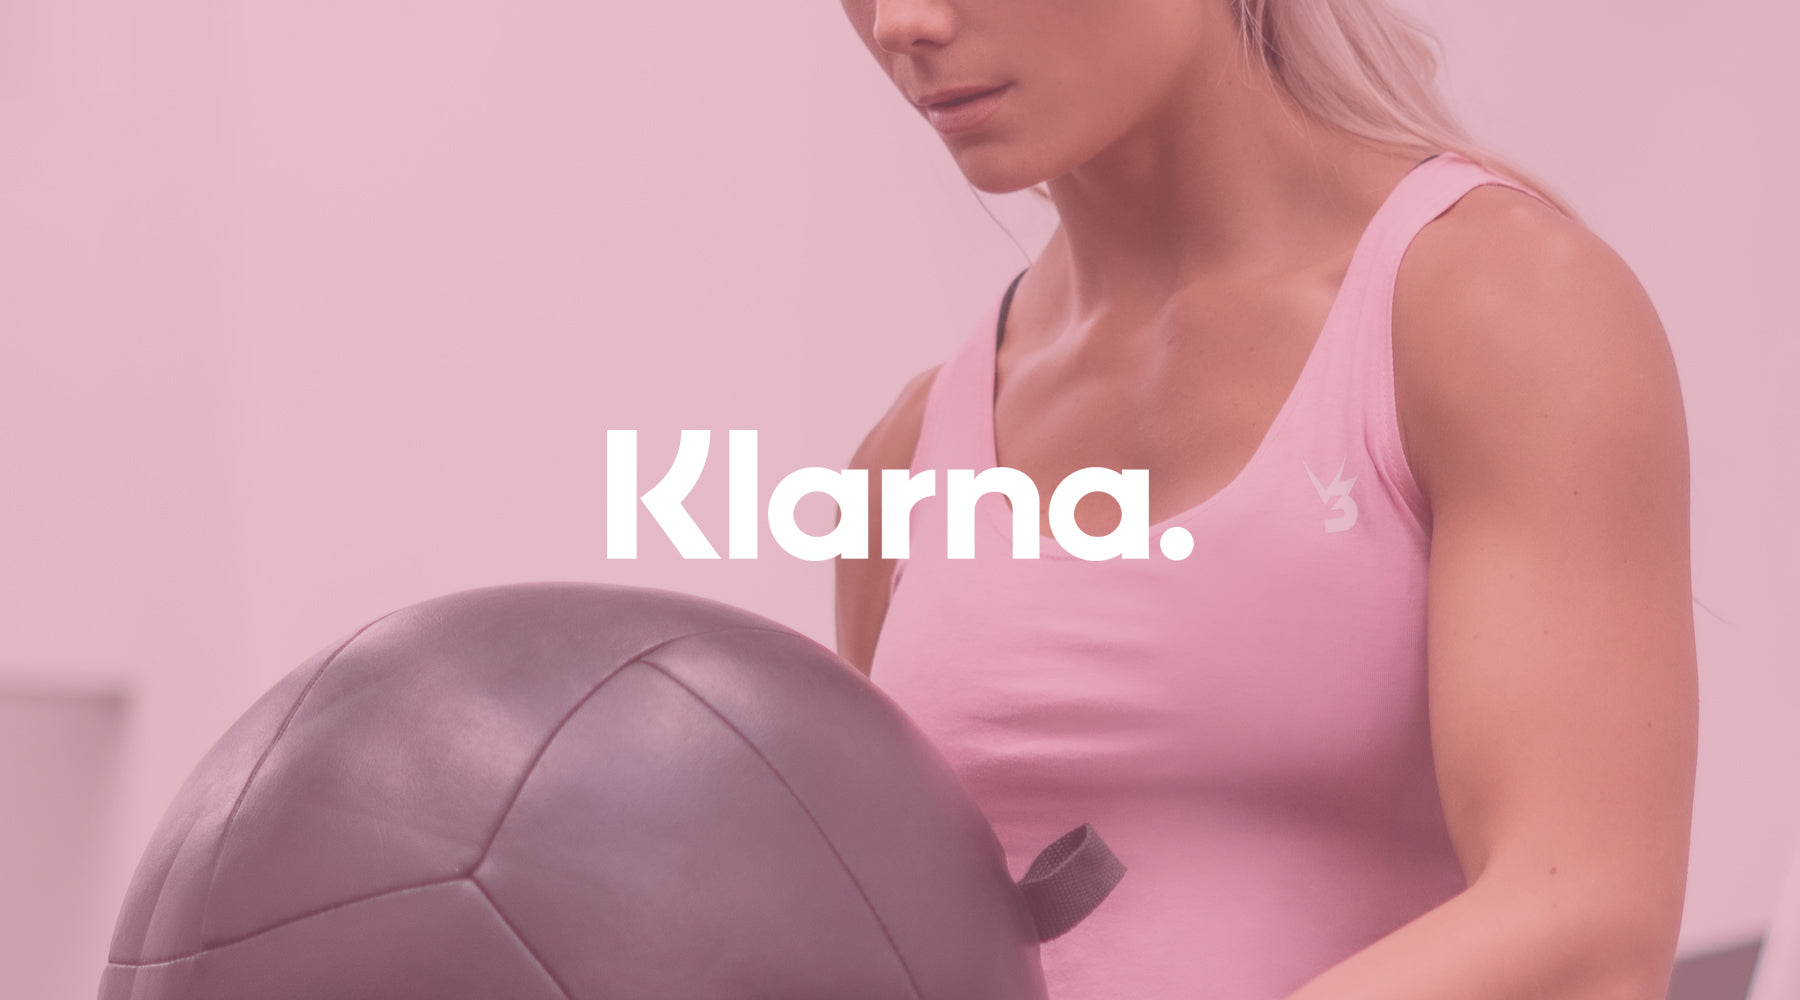 Klarna pay later partner with v3 apparel womens activewear, gym clothing and fitness workout clothes providing seamless scrunch leggings and sports bras